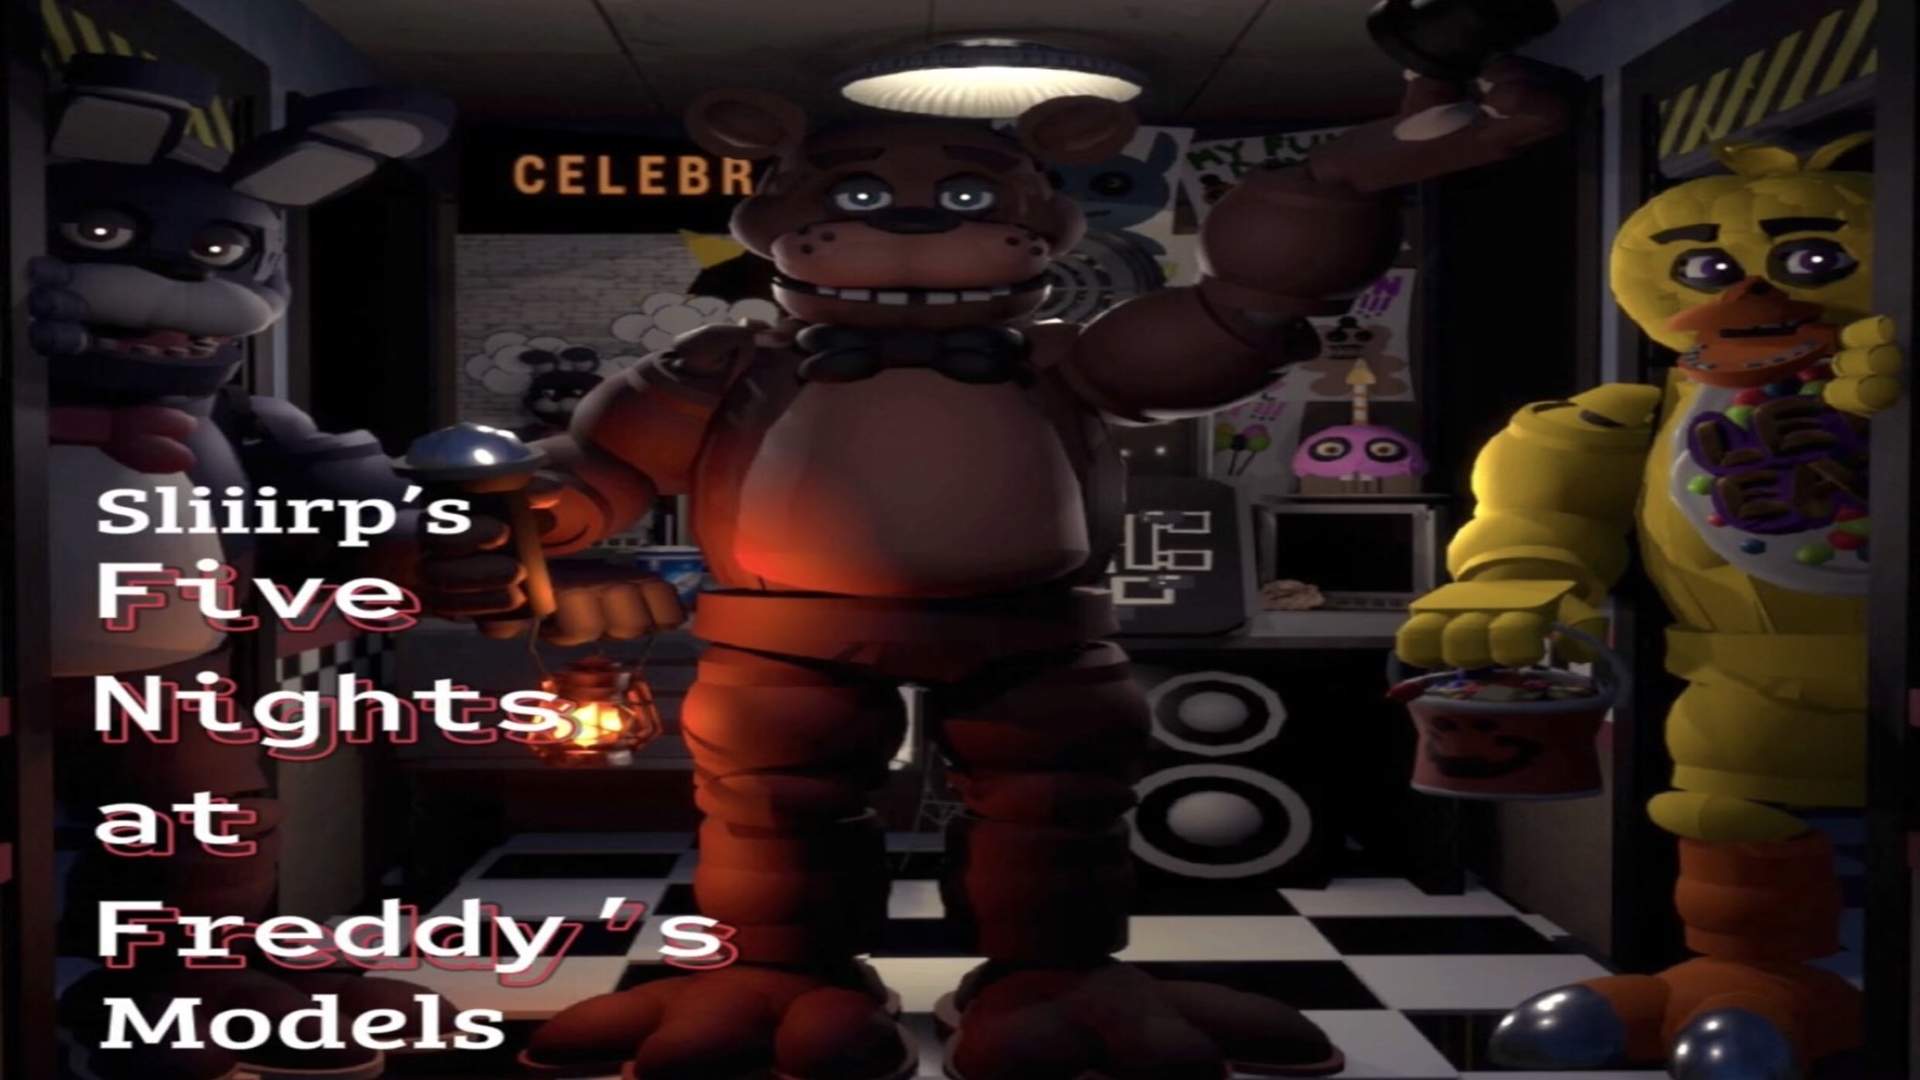 FIVE NIGHTS AT FREDDY'S MODELS